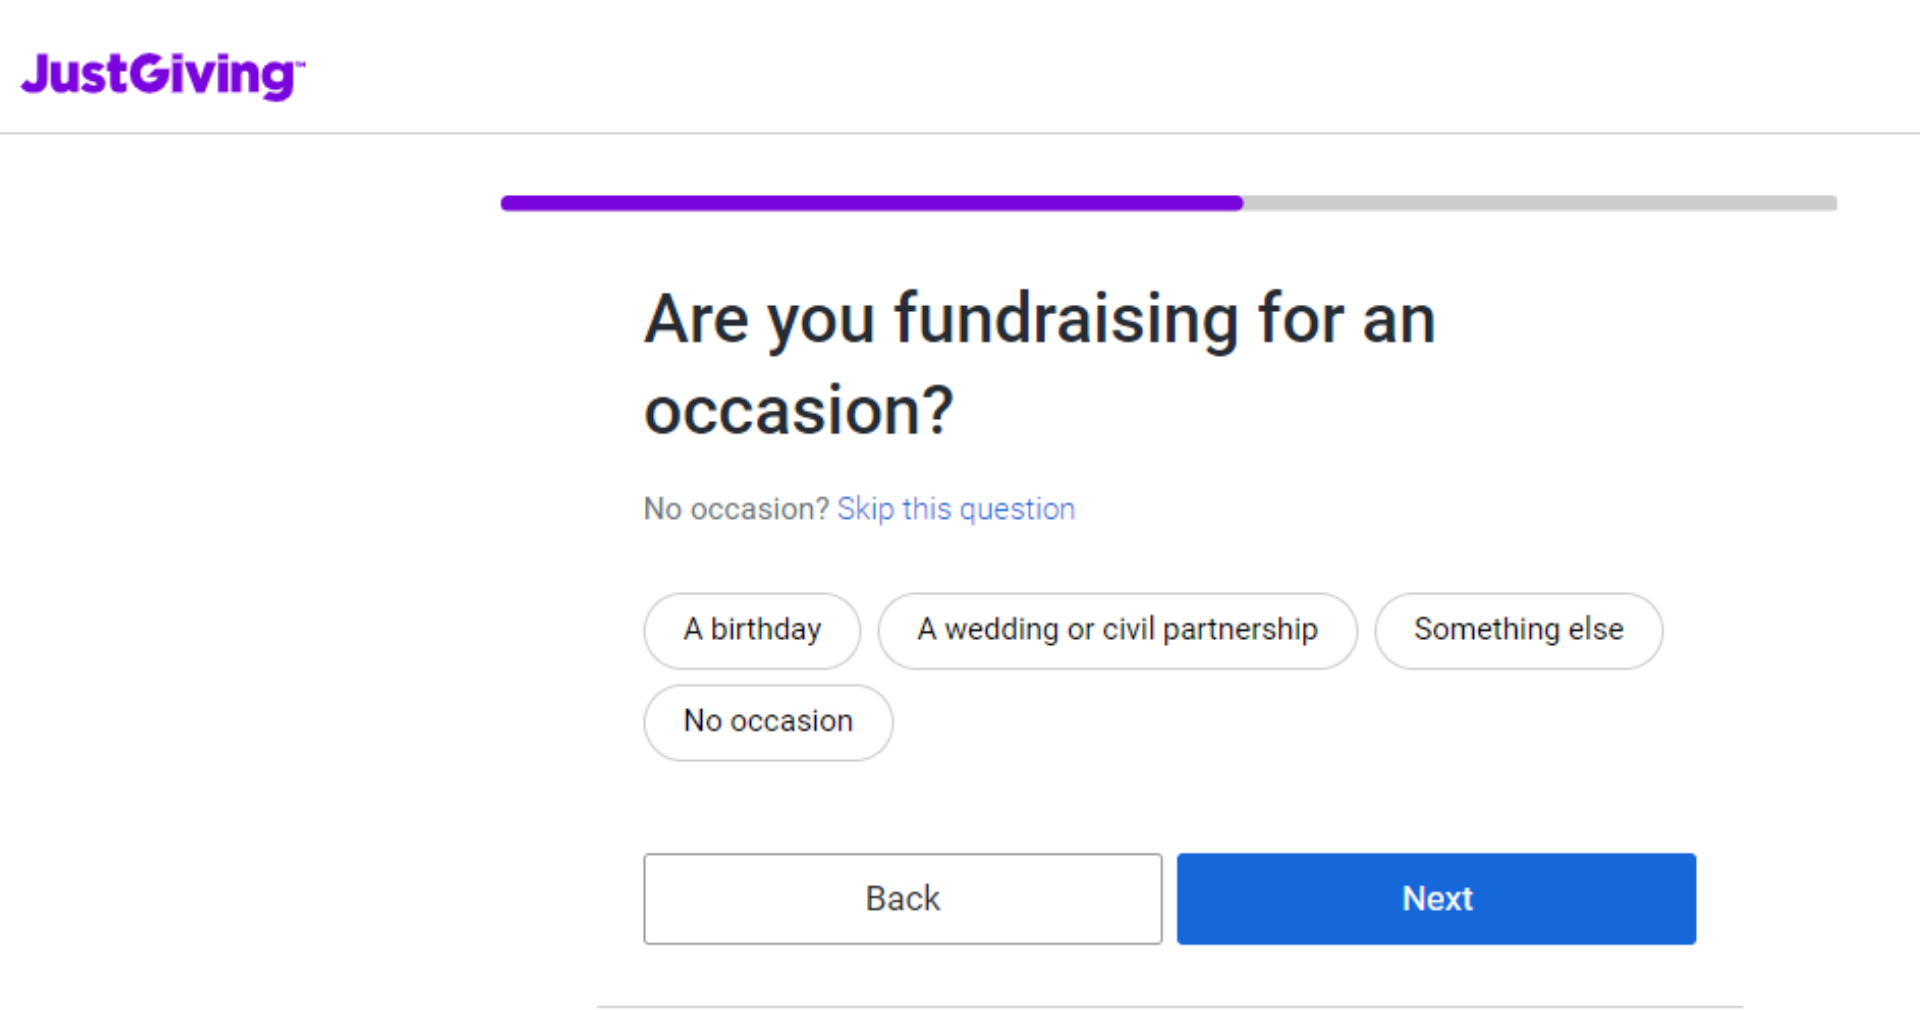 Guide to setting up a JustGiving page